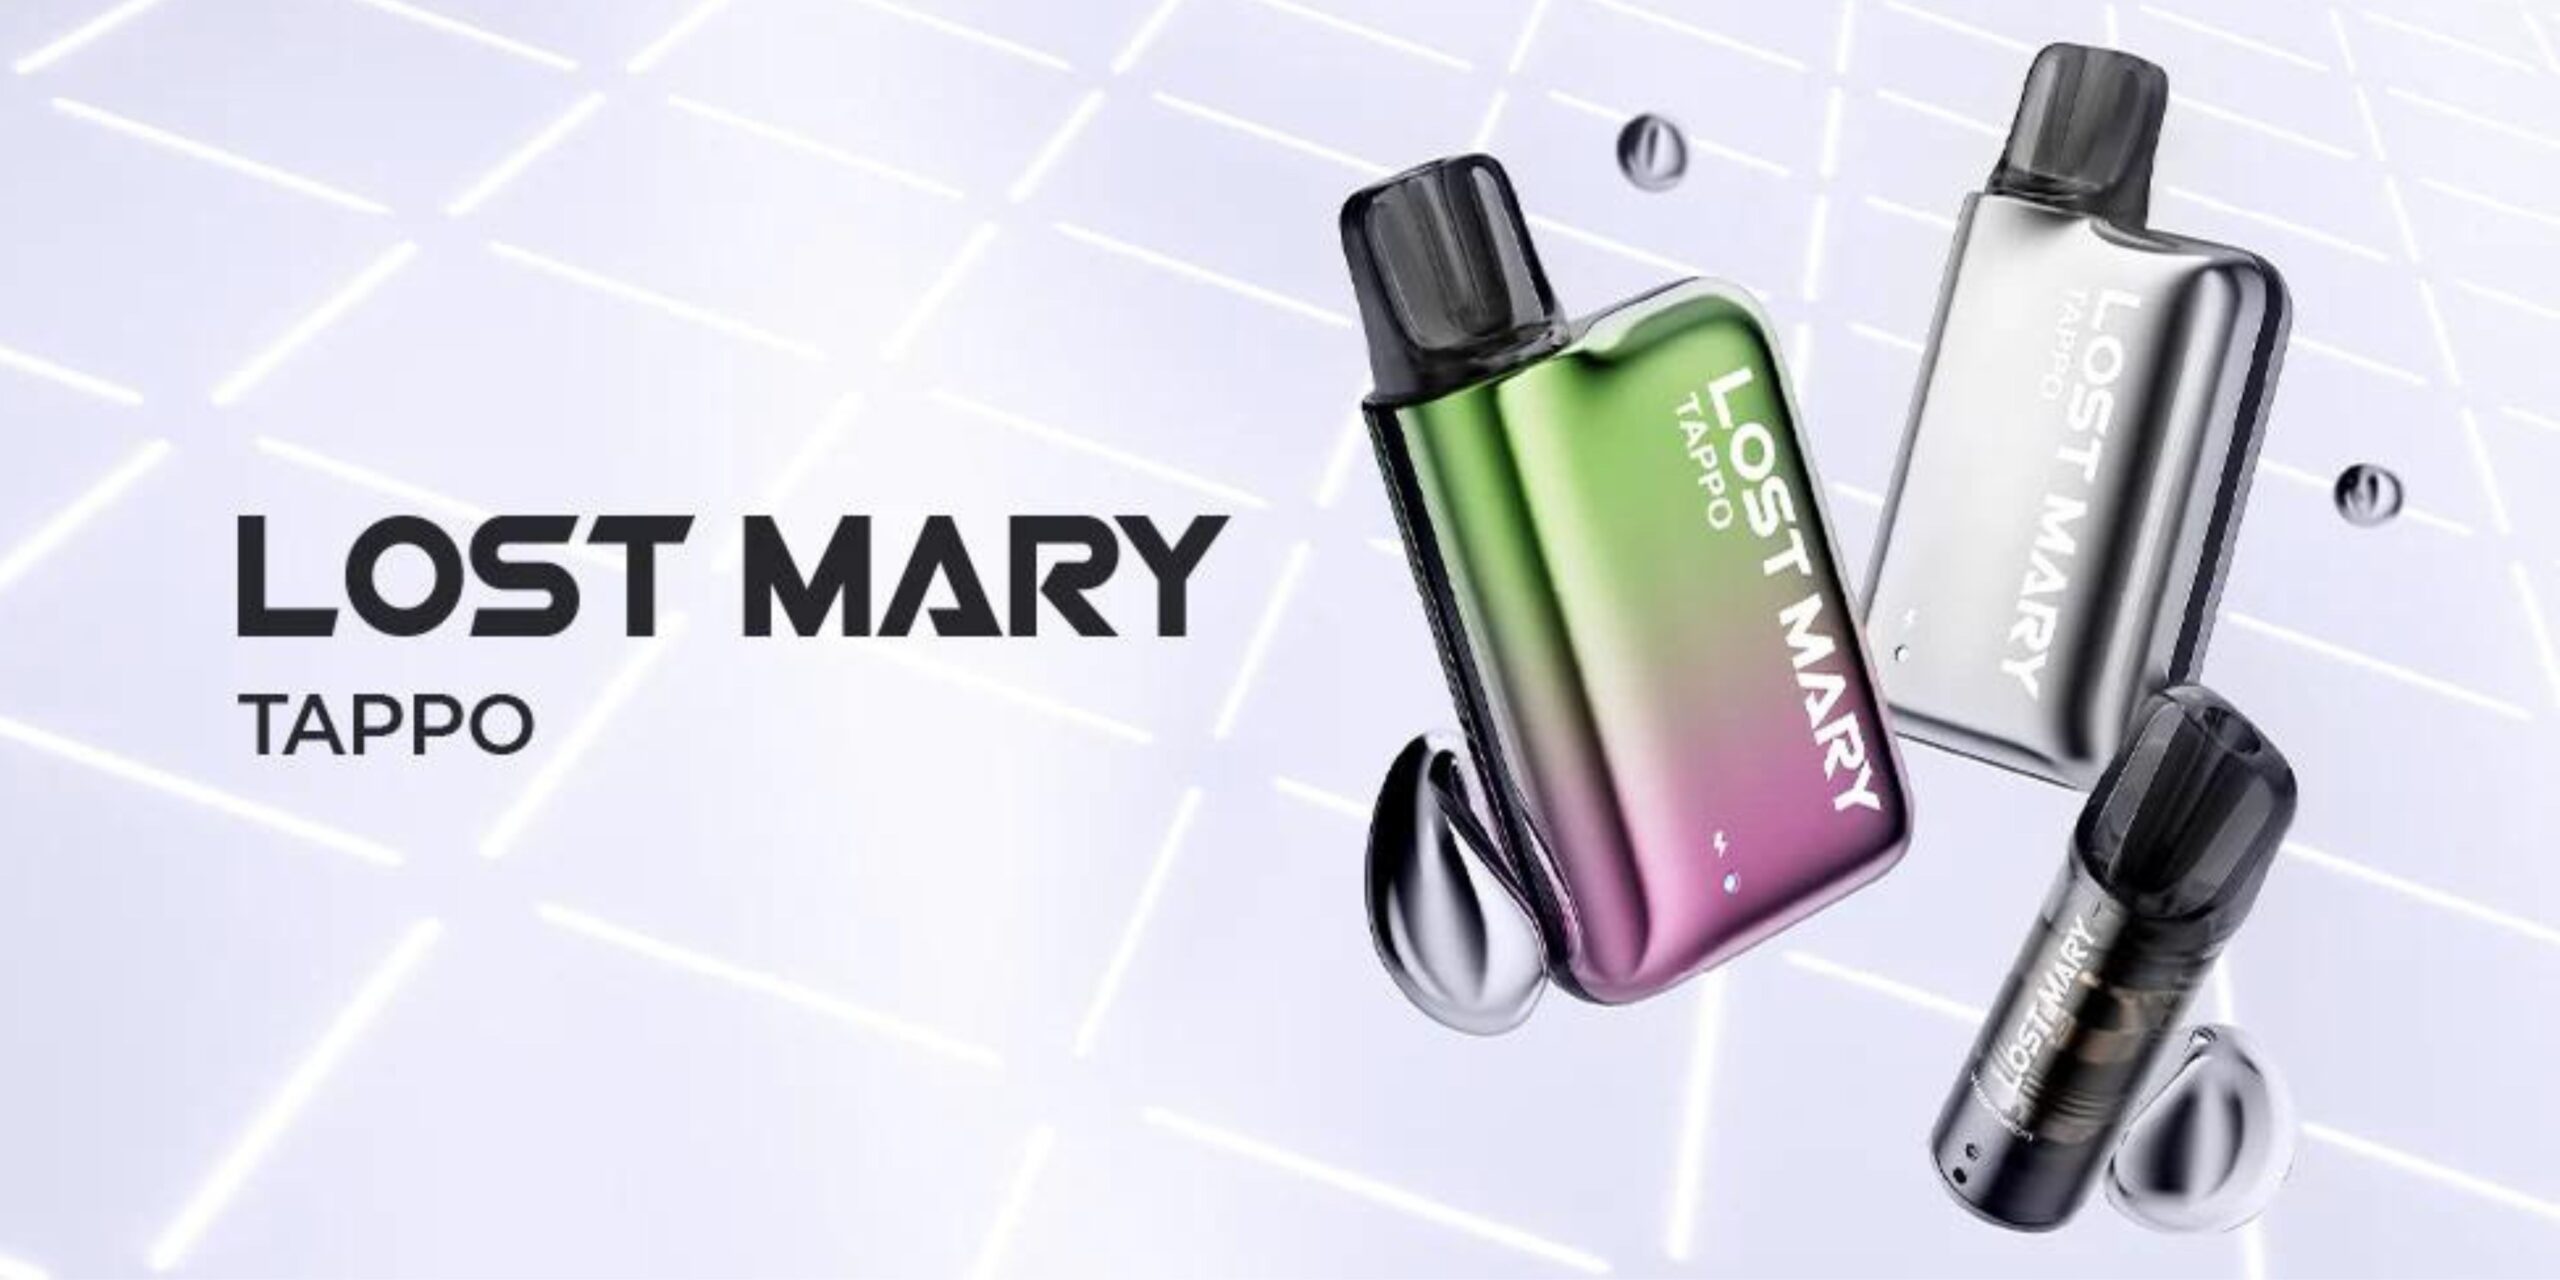 LOST MARY TAPPO – Blueberry Sour Raspberry (Replacement Prefilled Pods) VAPING - XMANIA Ireland 15